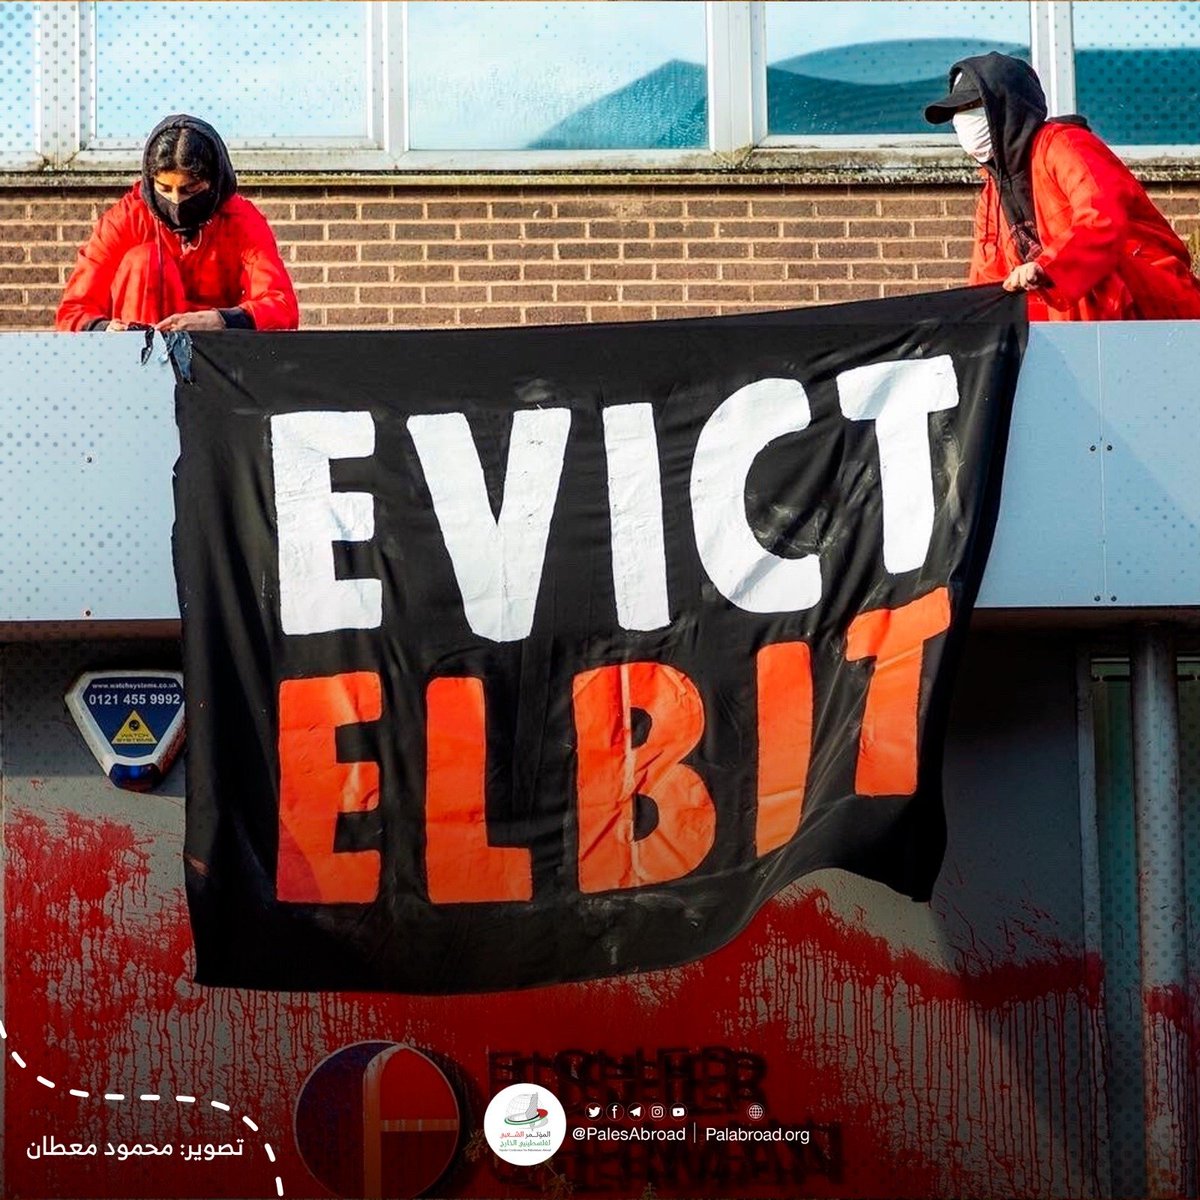 #PHOTO | Elbit factory in Manchester in protest of its arms sales to “Israel”
#ShutElbitDown #EvictElbit #FreePalestine